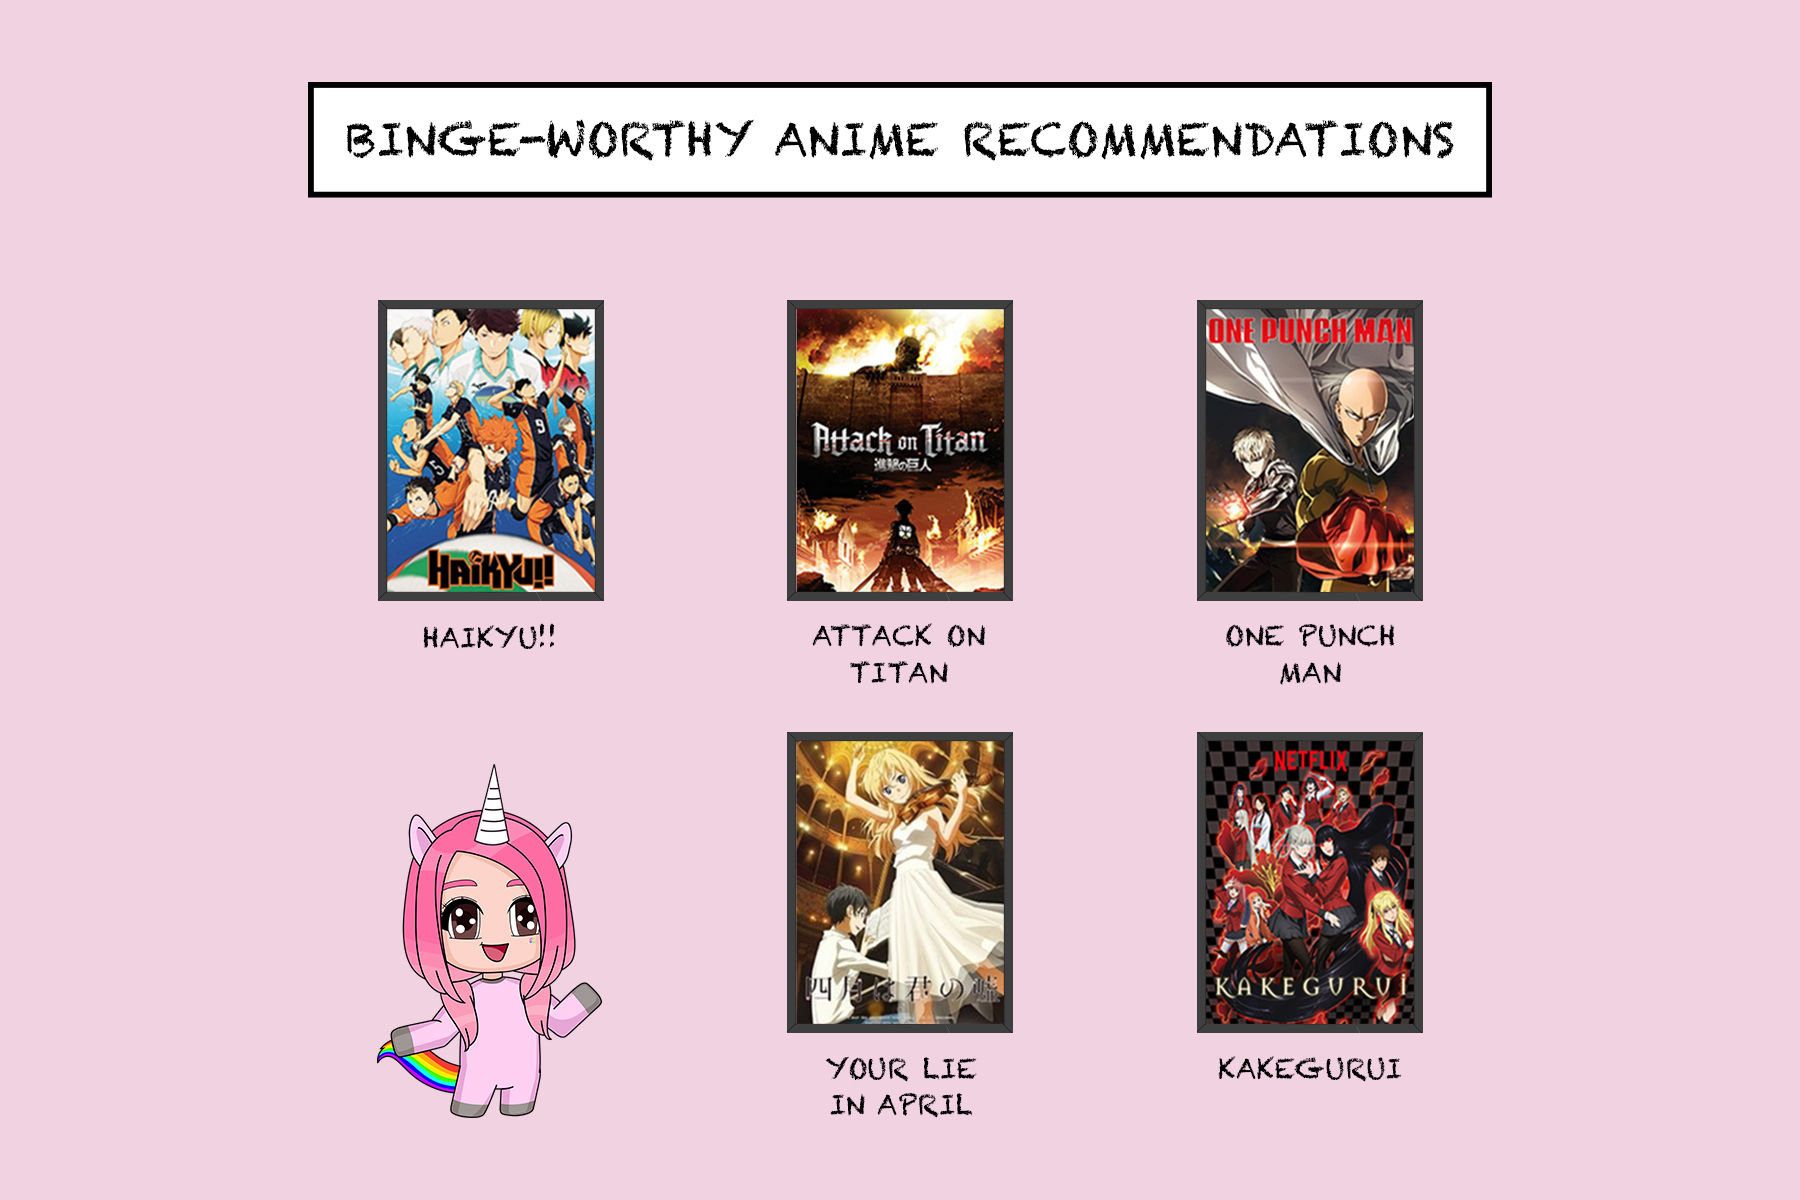 2° recomendaciones  Anime recommendations, Anime suggestions